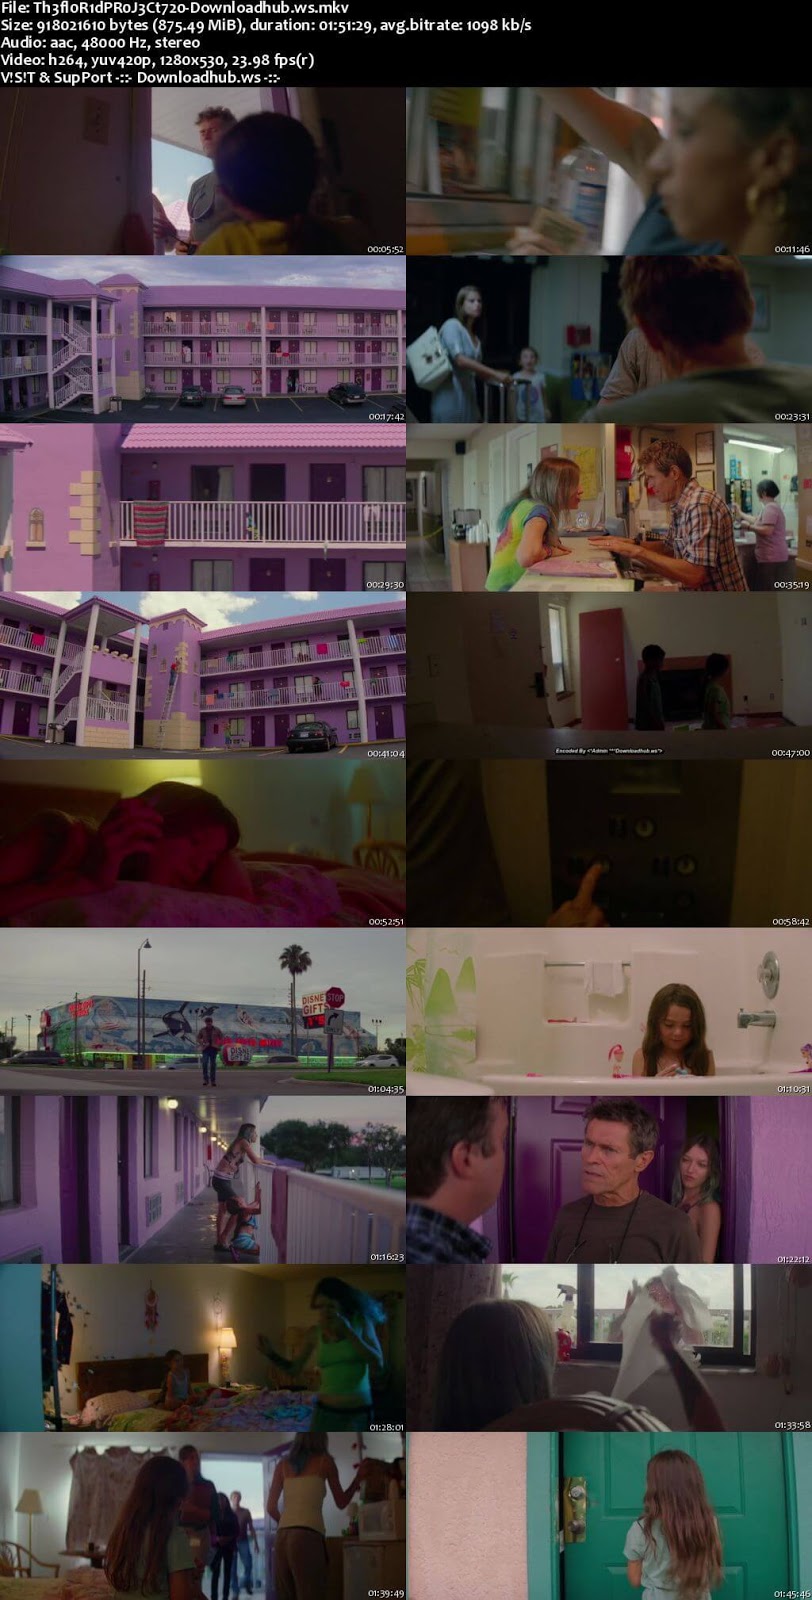 The Florida Project 2017 English 720p Web-DL 850MB ESubs